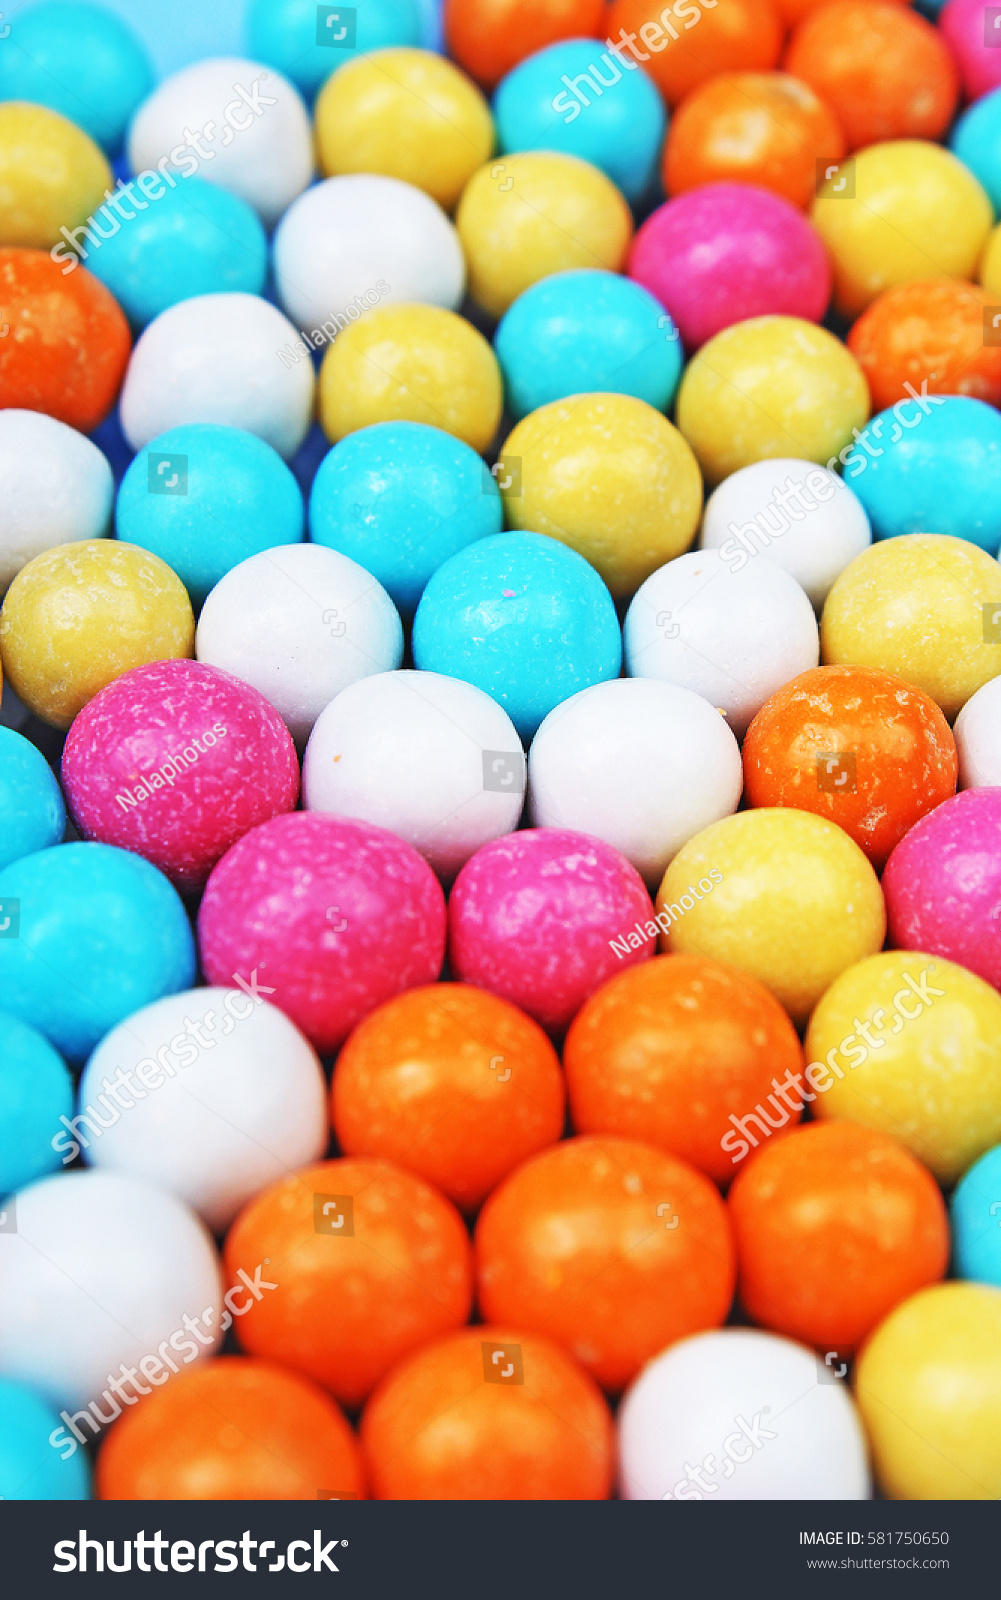 Bubble gum chewing gum texture. Rainbow multicolored gumballs chewing gums as background. Round sugar coated candy bonbon bubblegum texture. Colorful multicolor bubblegums wallpaper. Candy background #581750650